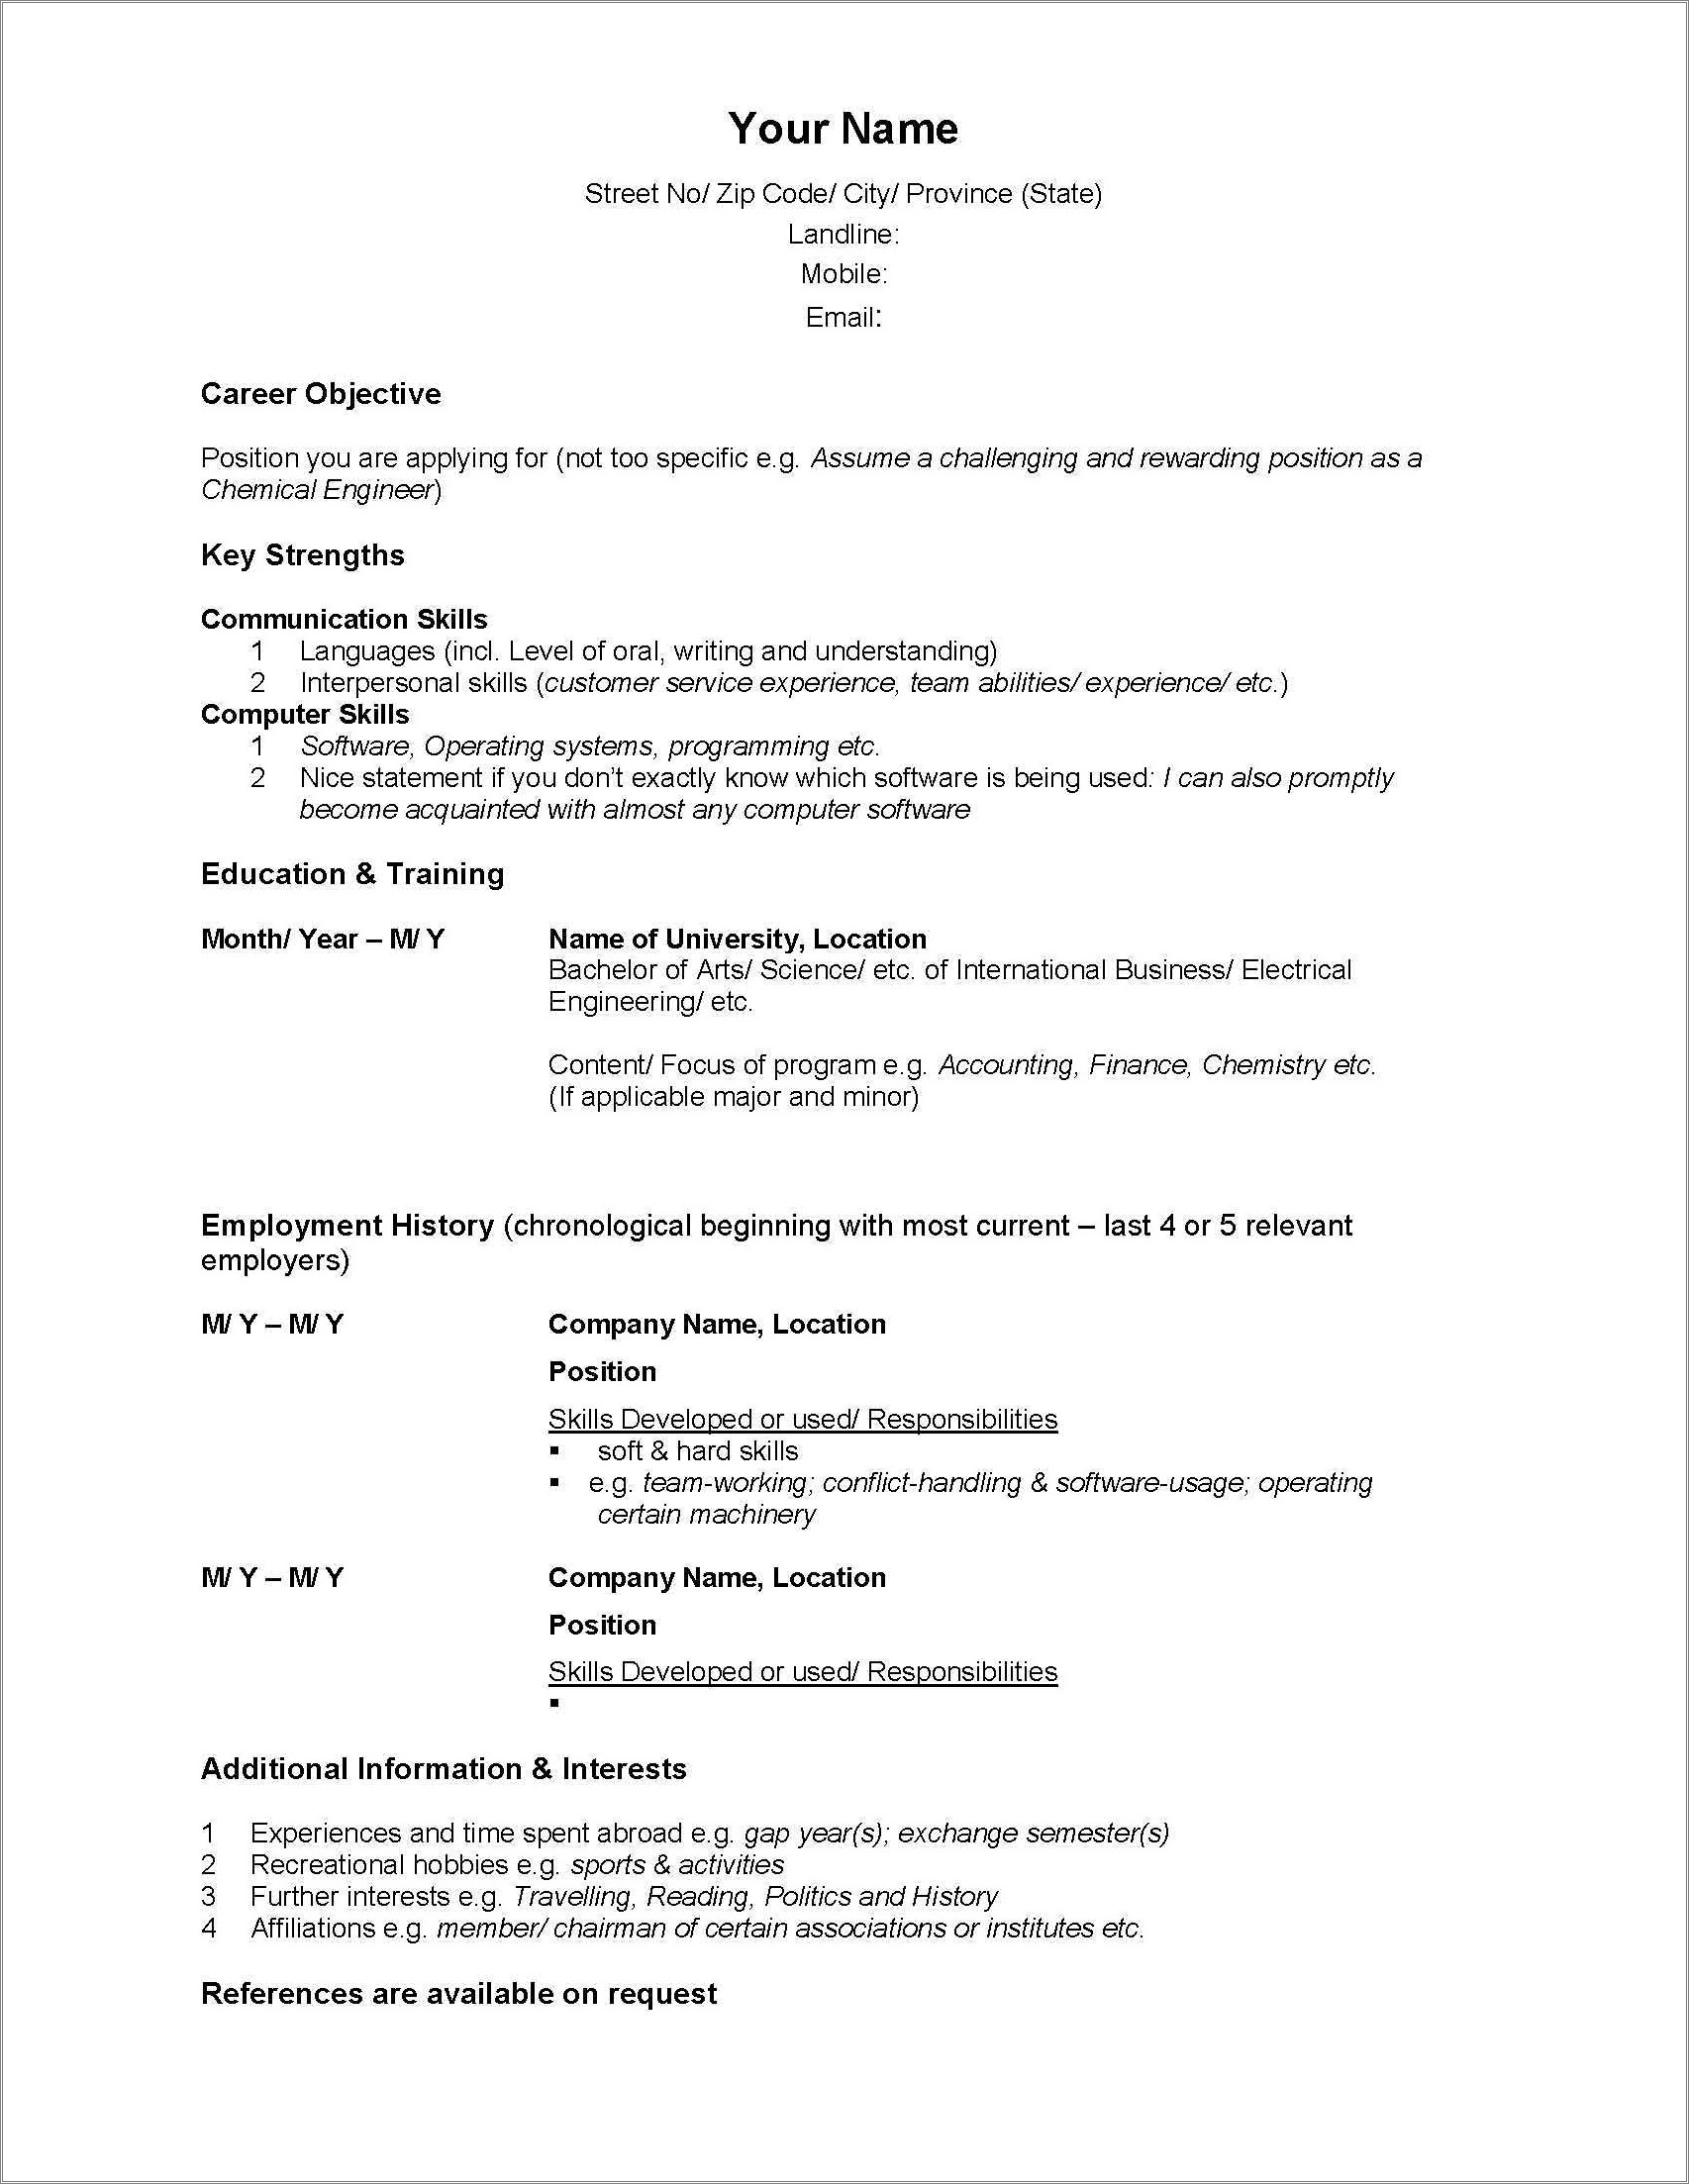 Best Resume Format To Upload To Job Boards